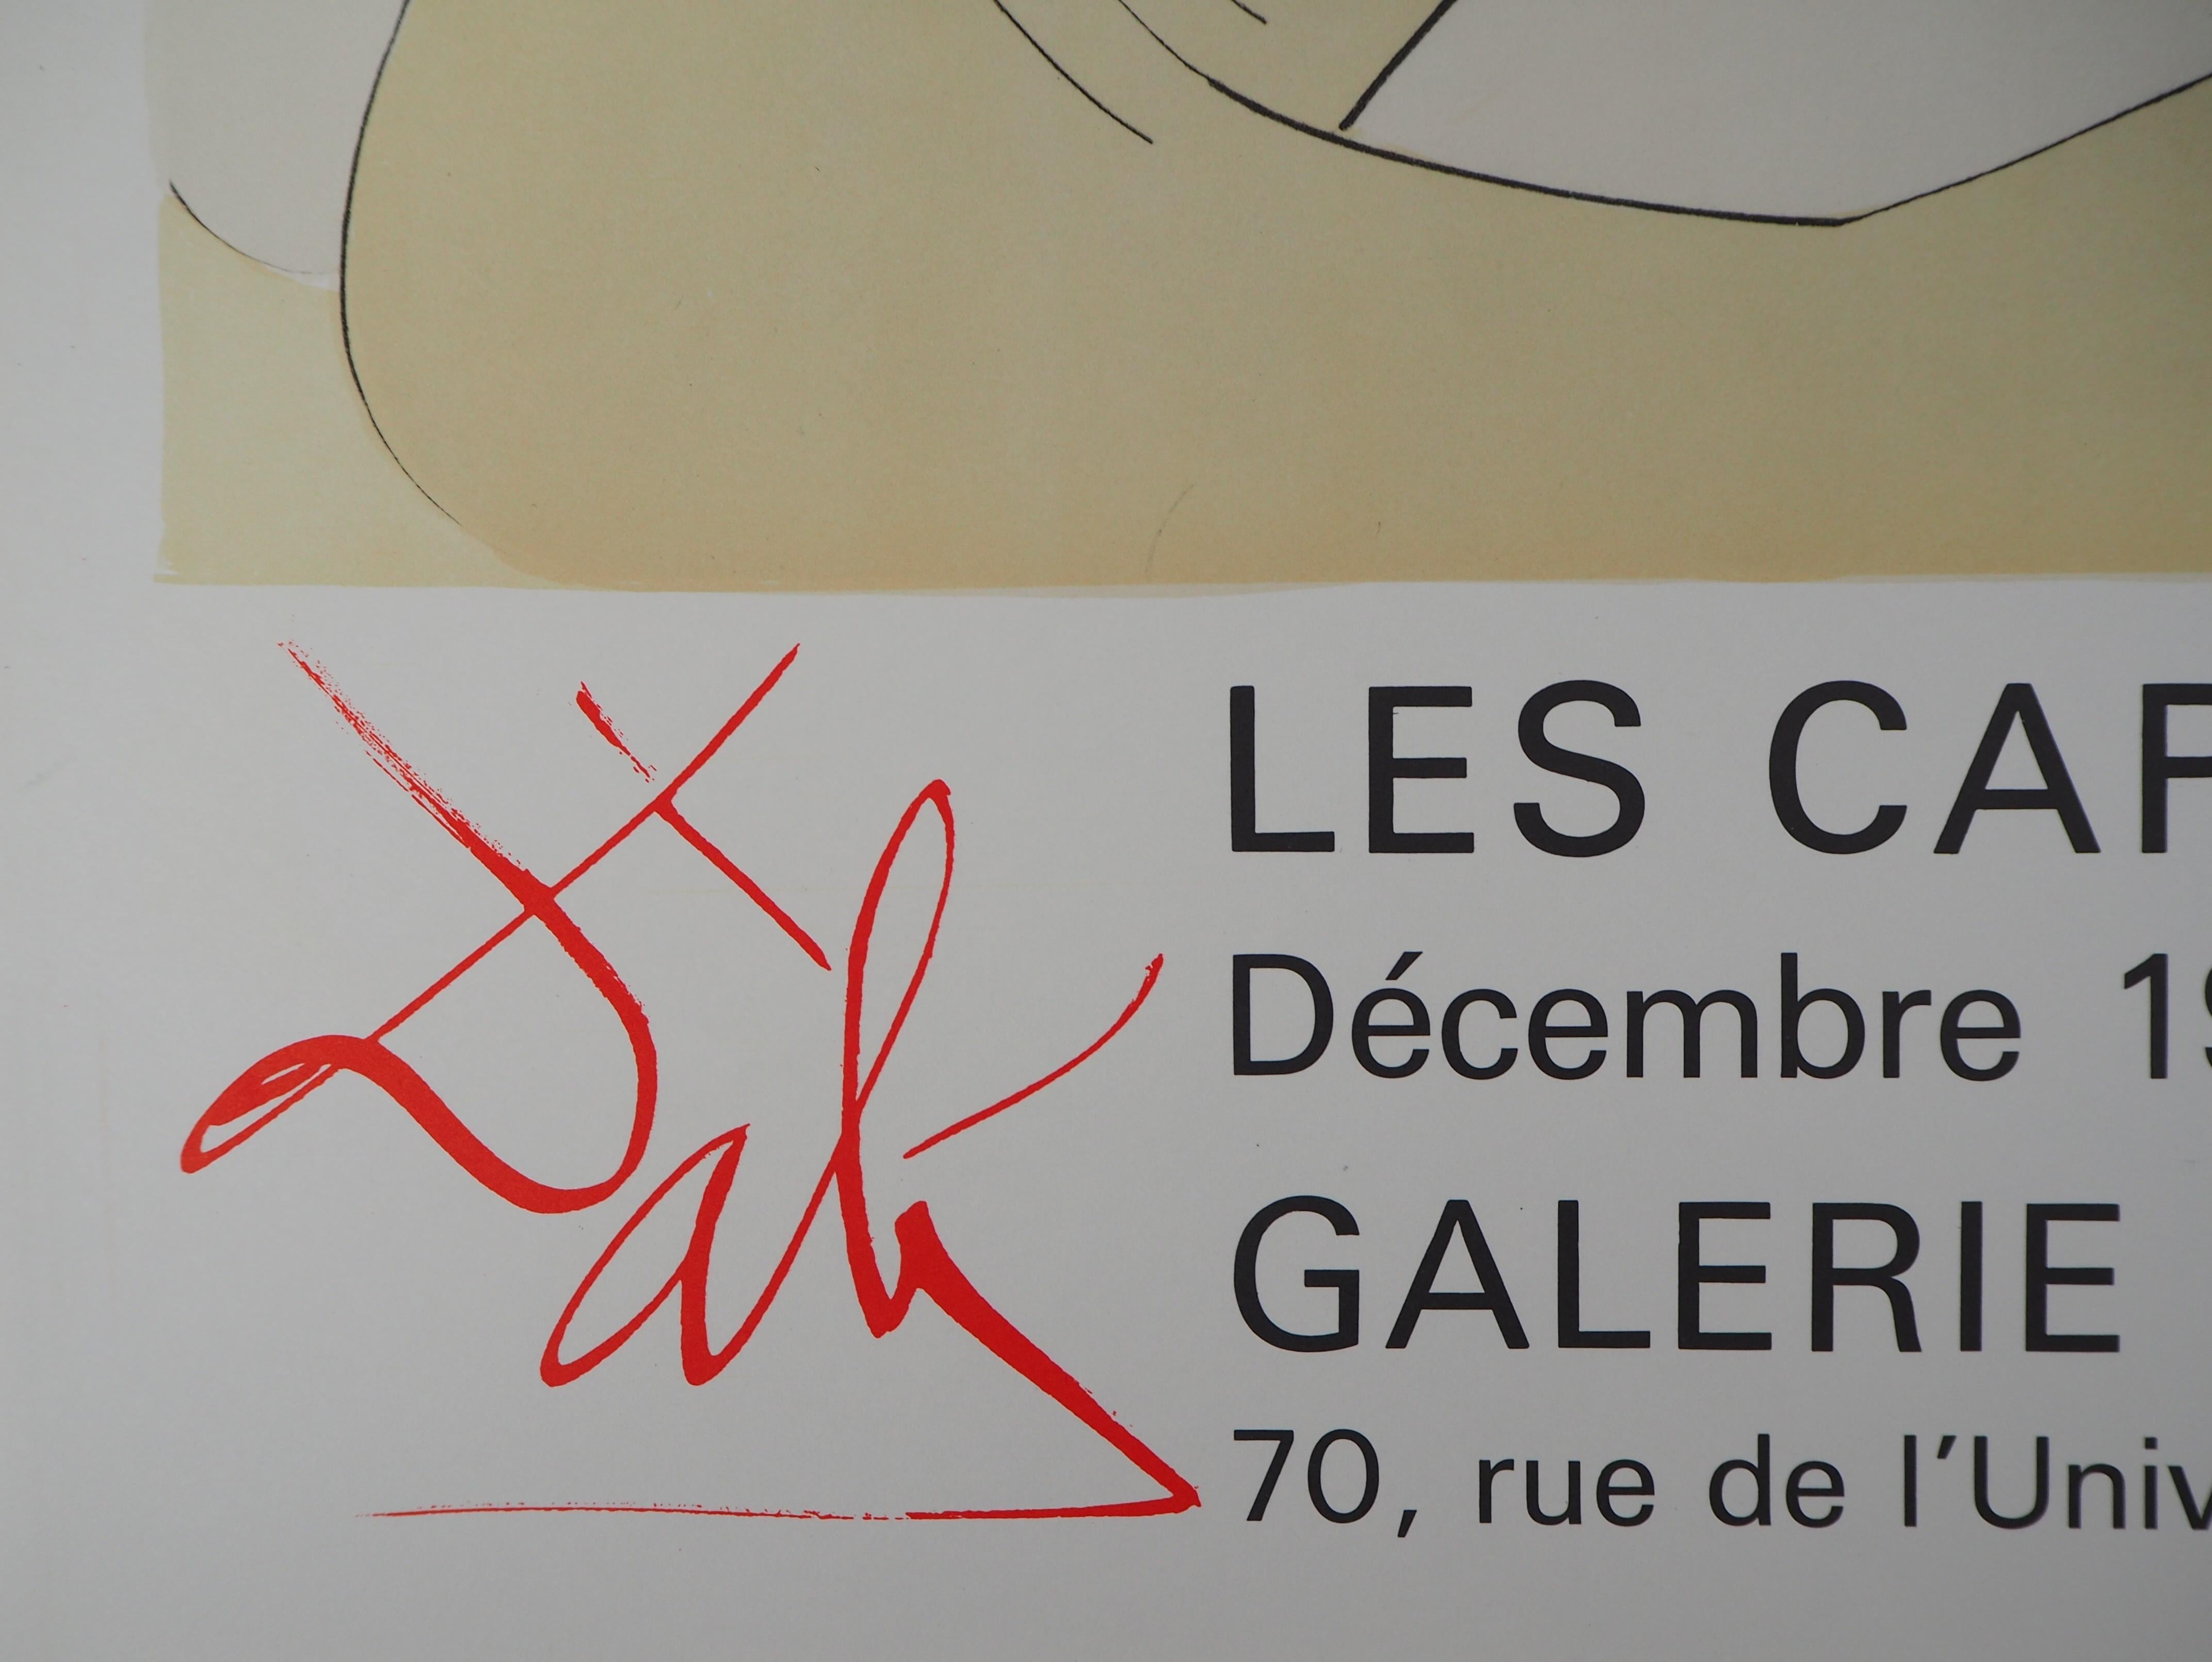 Salvador Dali (after)
Les Caprices de Goya, 1977

Lithograph (Desjobert workshop)
Printed signature in the plate
On heavy paper 65 x 45 cm (c. 18 x 26 in)

Original vintage lithograph poster for the exhibition at Berggruen Gallery (Paris) in 1977.